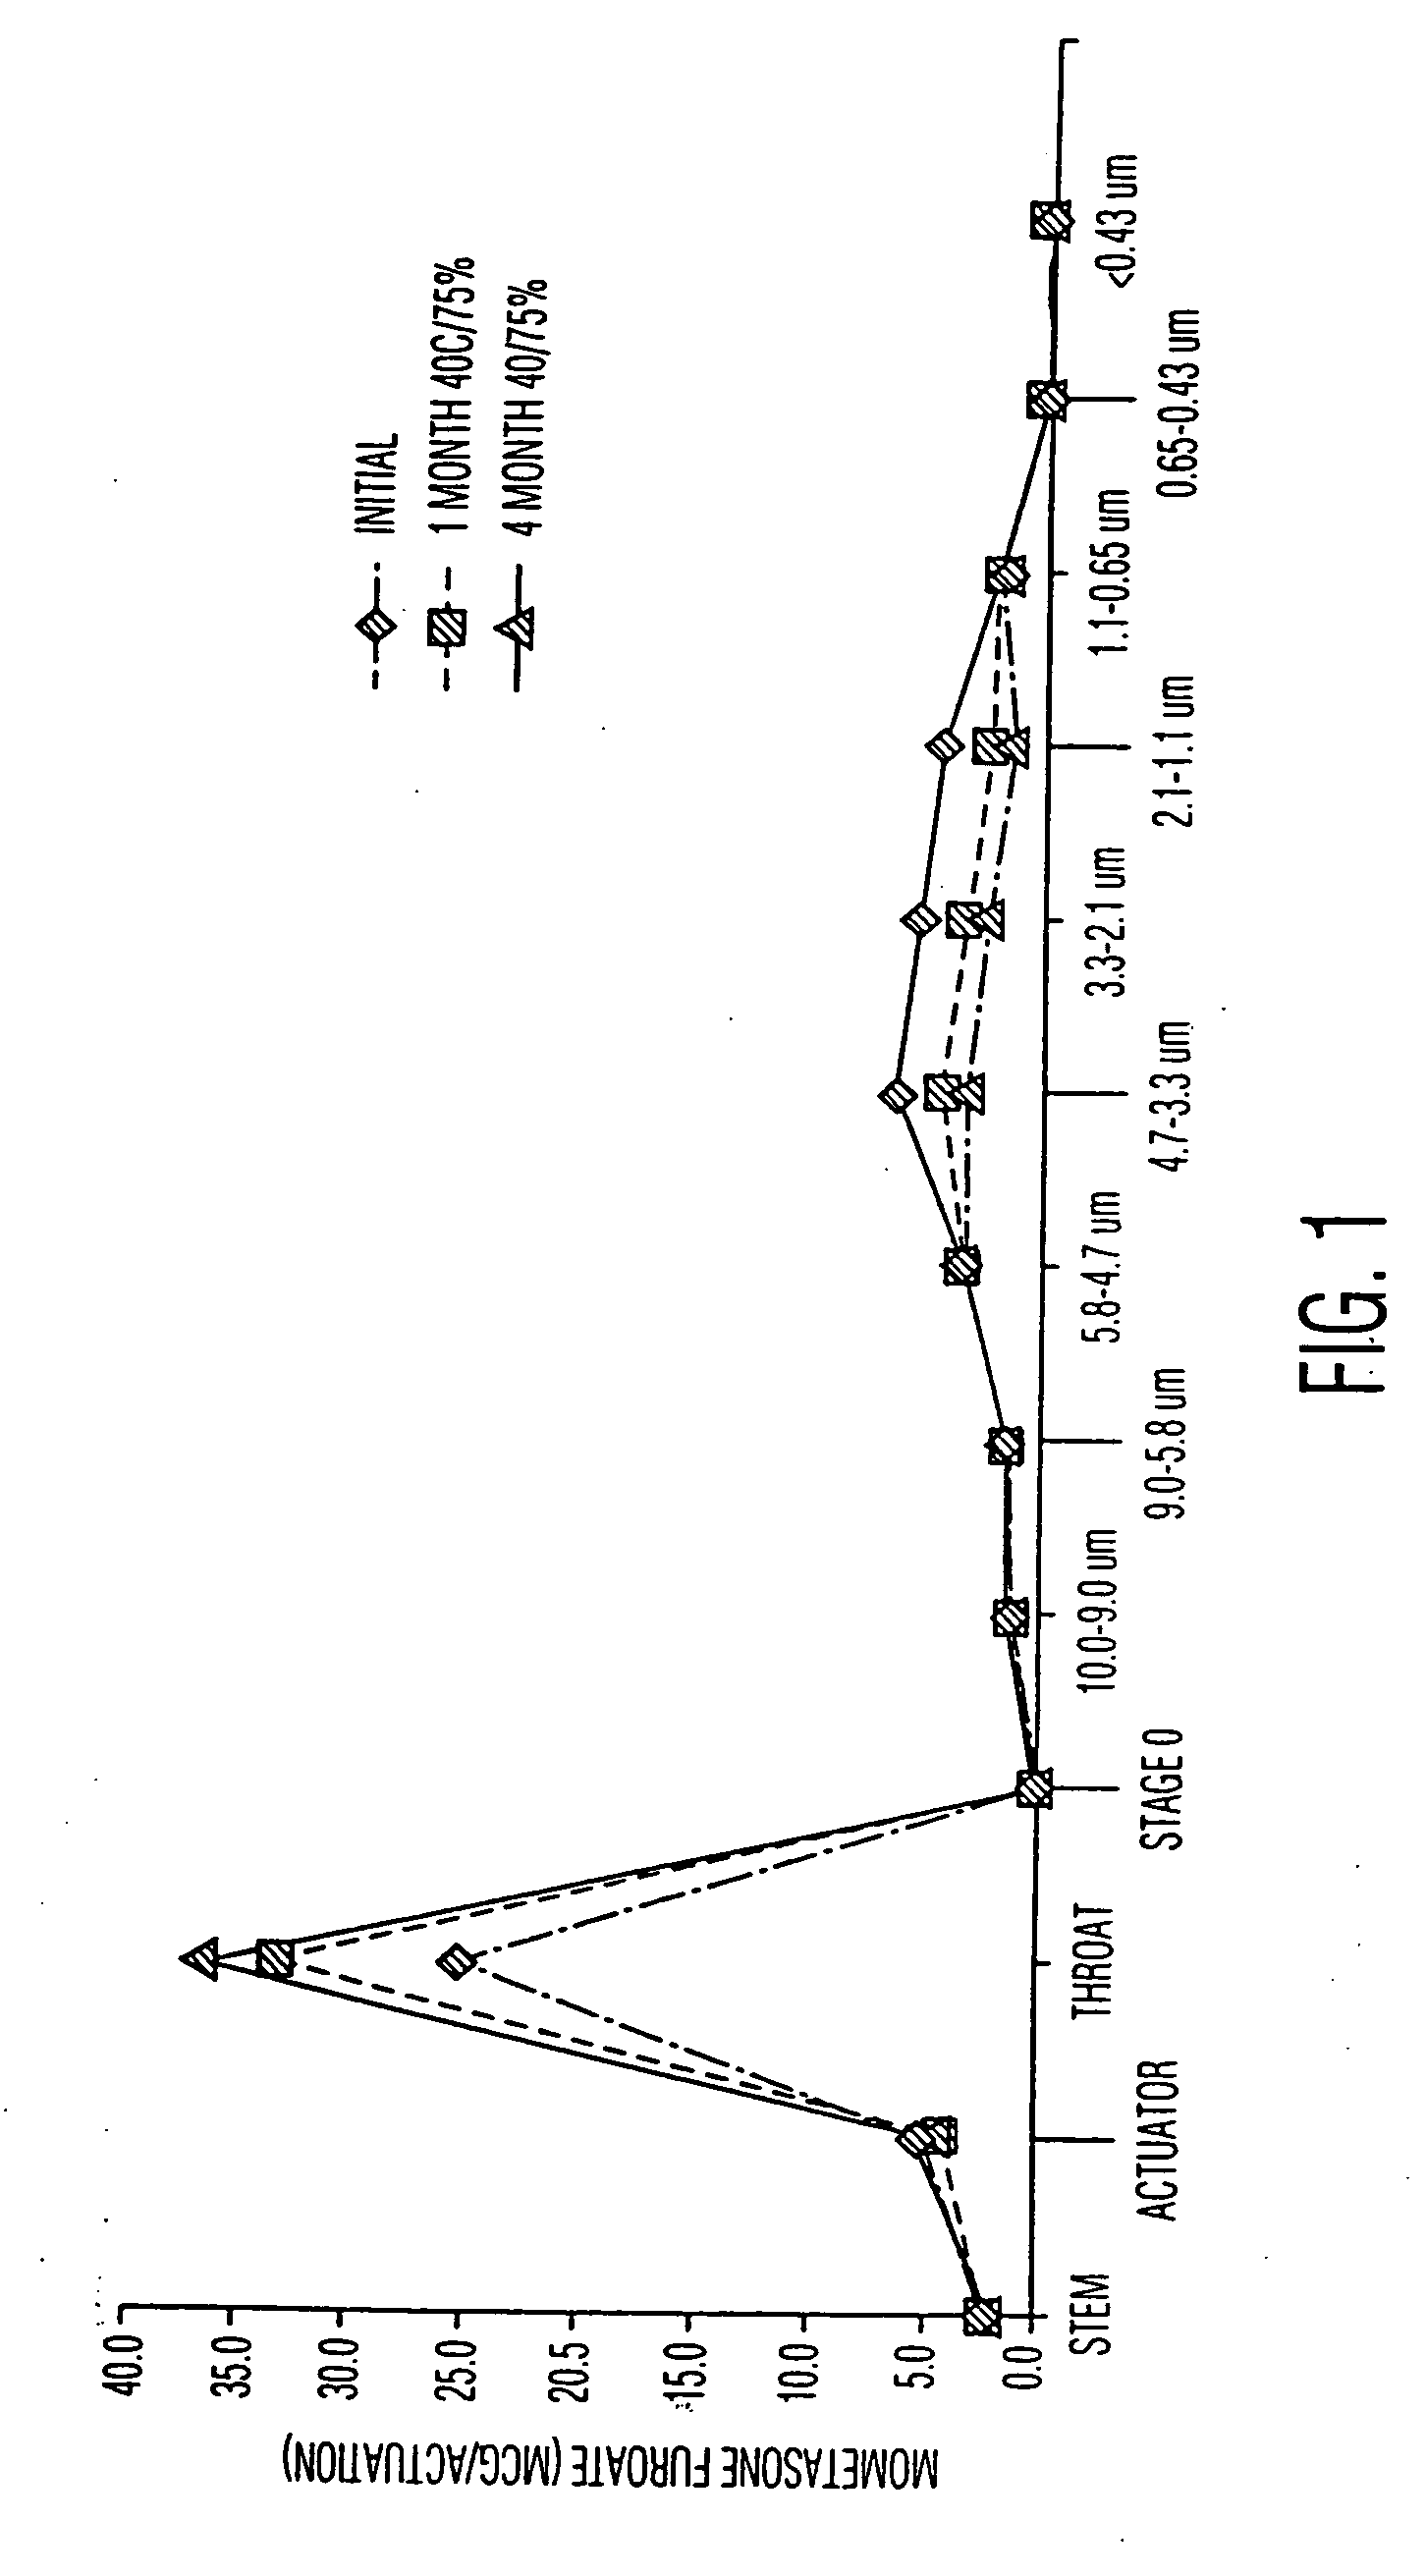 Pharmaceutical compositions for the treatment of asthma